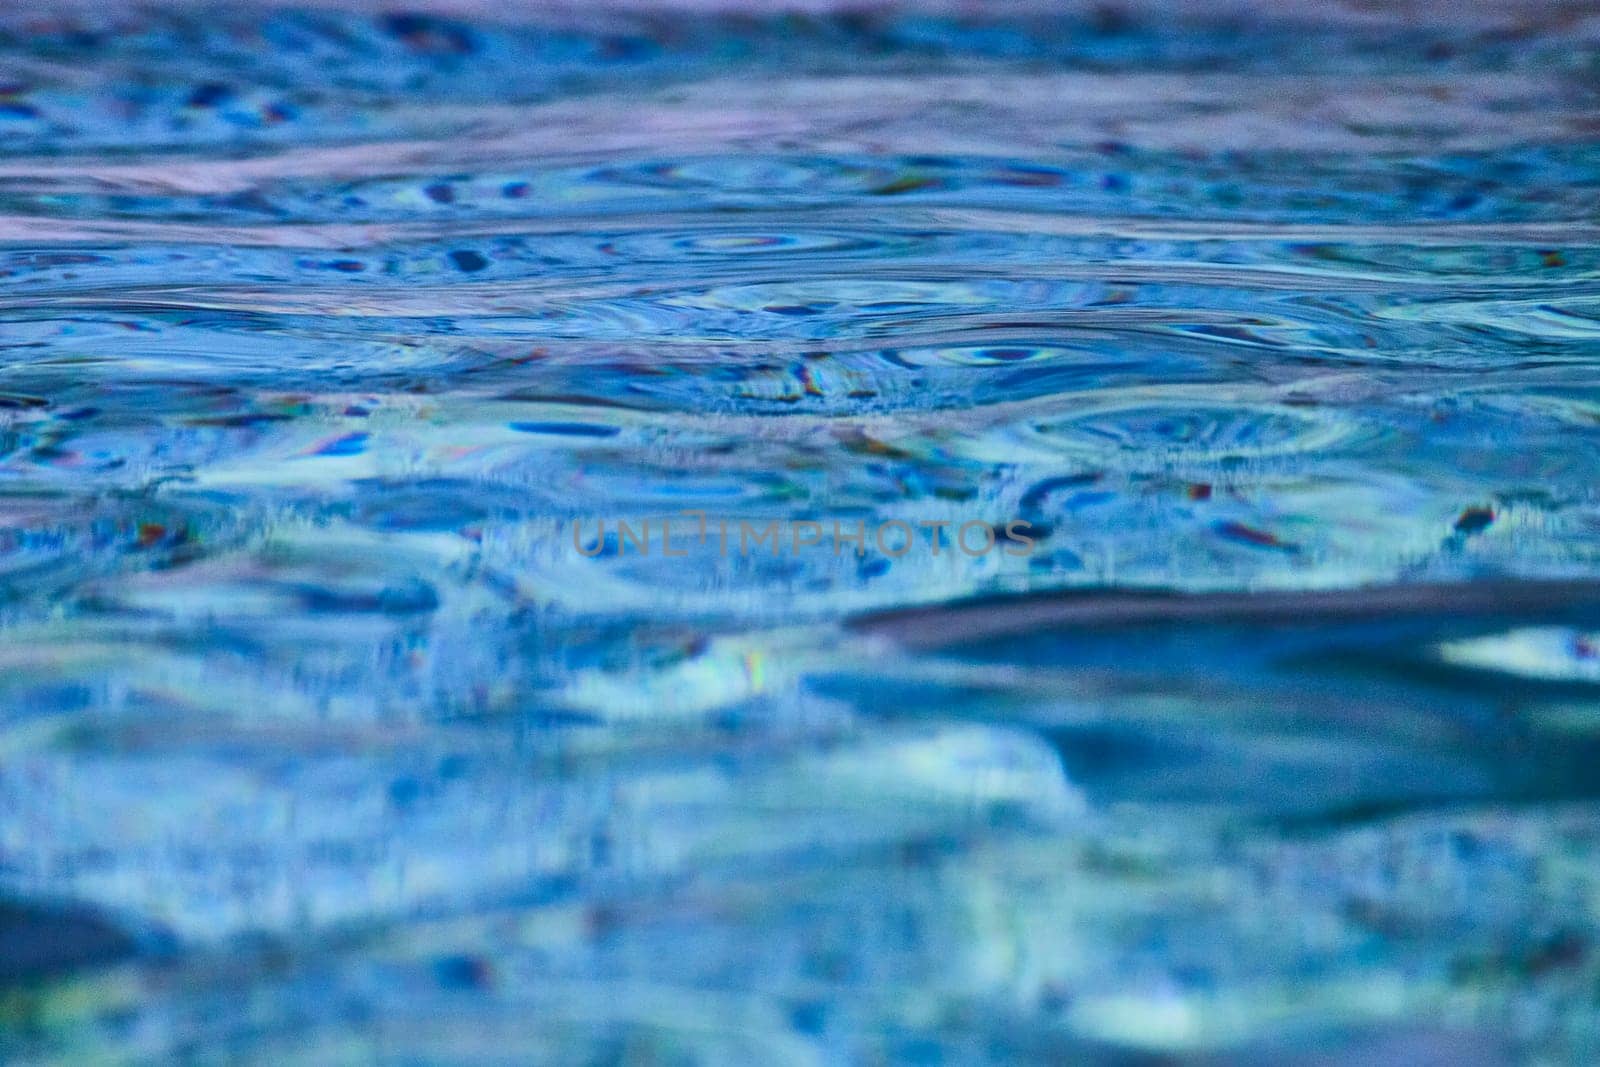 Vibrant water ripples in close-up, showcasing nature's palette of blues and greens with a hint of dynamic light.